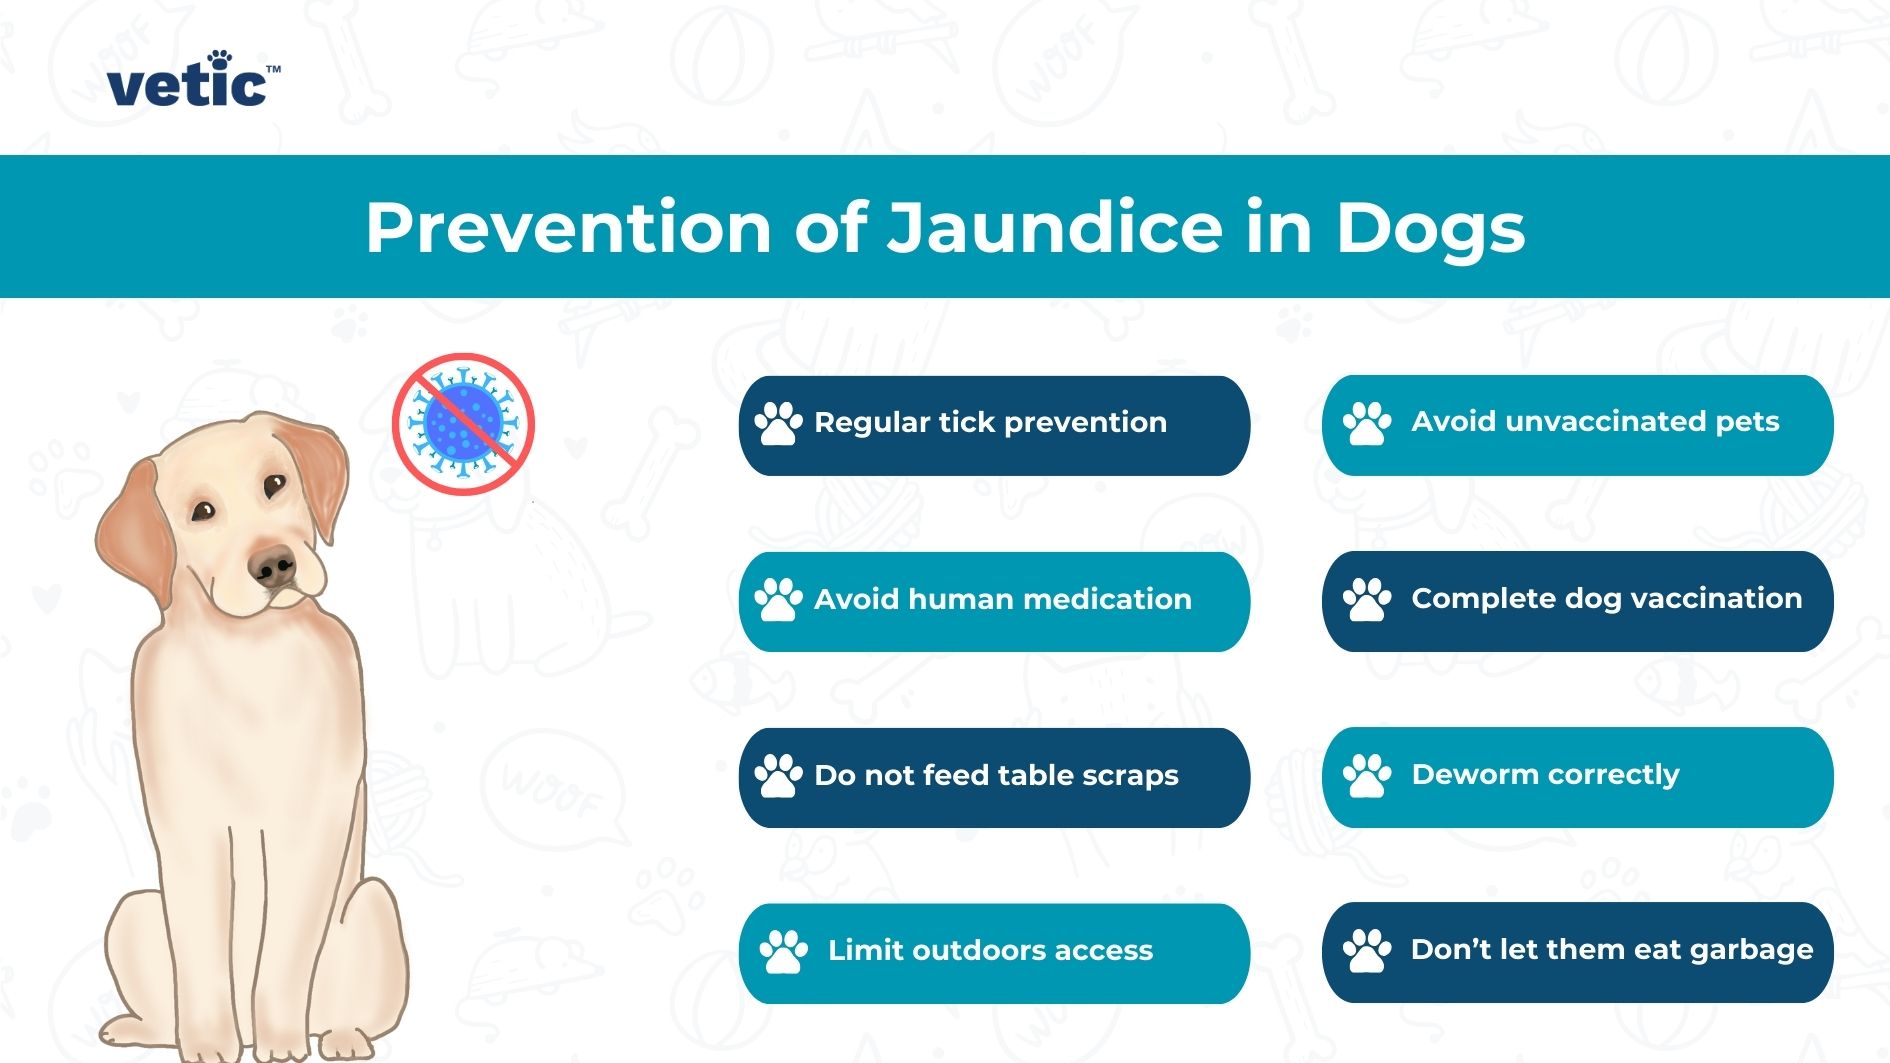 The image is an informational graphic from “vetic” about the “Prevention of Jaundice in Dogs”. A drawn image of a light-colored dog sitting is centrally placed. There are eight preventative measures listed with icons: Regular tick prevention, Avoid unvaccinated pets, Avoid human medication, Complete dog vaccination, Do not feed table scraps, Deworm correctly, Limit outdoors access, and Don’t let them eat garbage.